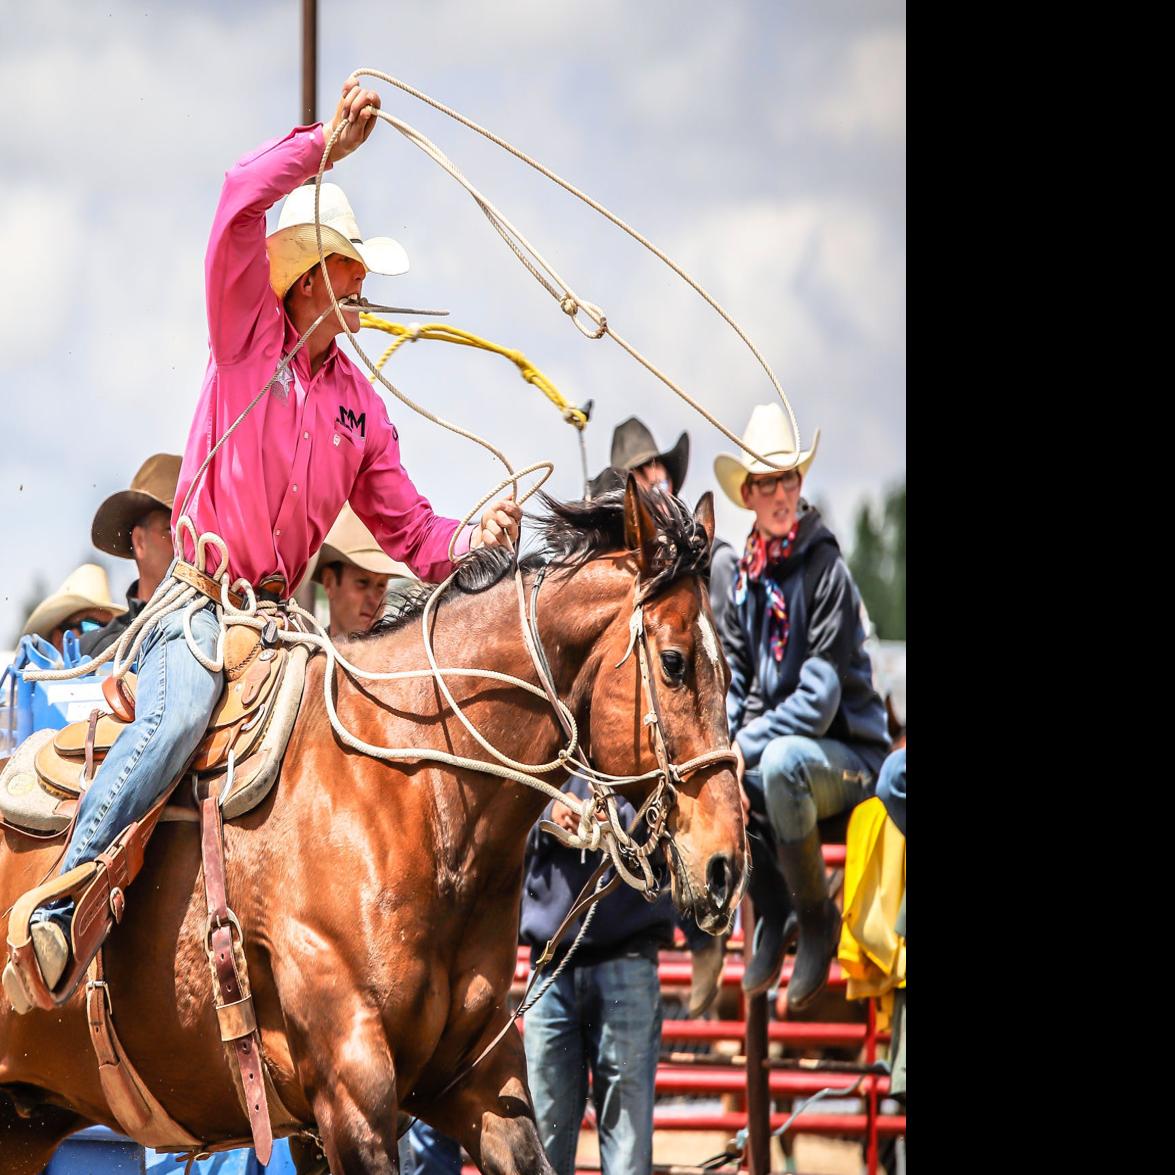 A Look At The 21 State High School Rodeo Finals Tie Down Roping Sports Postregister Com